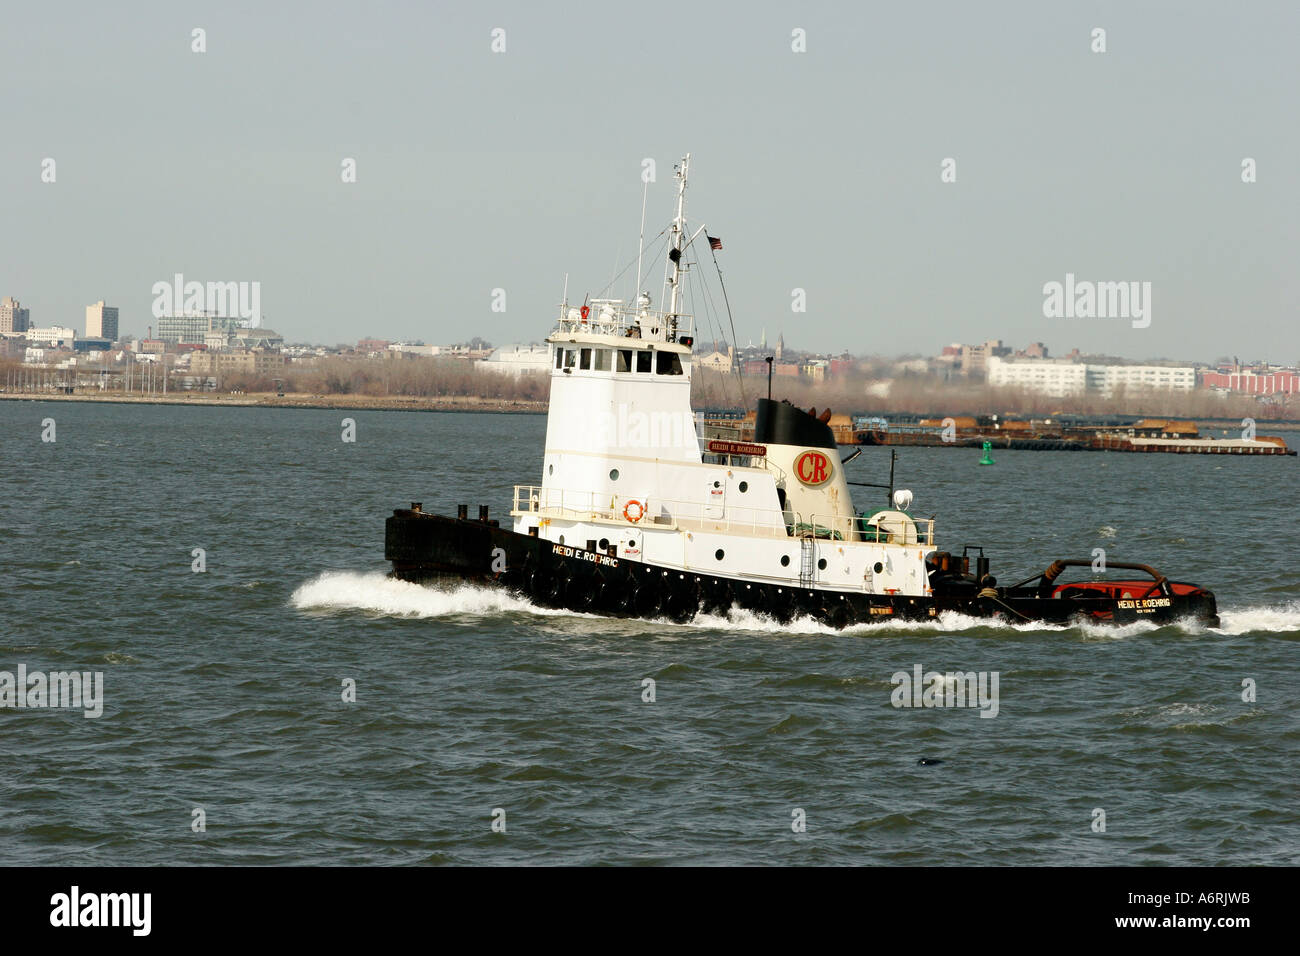 Tug boat on the Hudson river. New York United States of America. Stock Photo